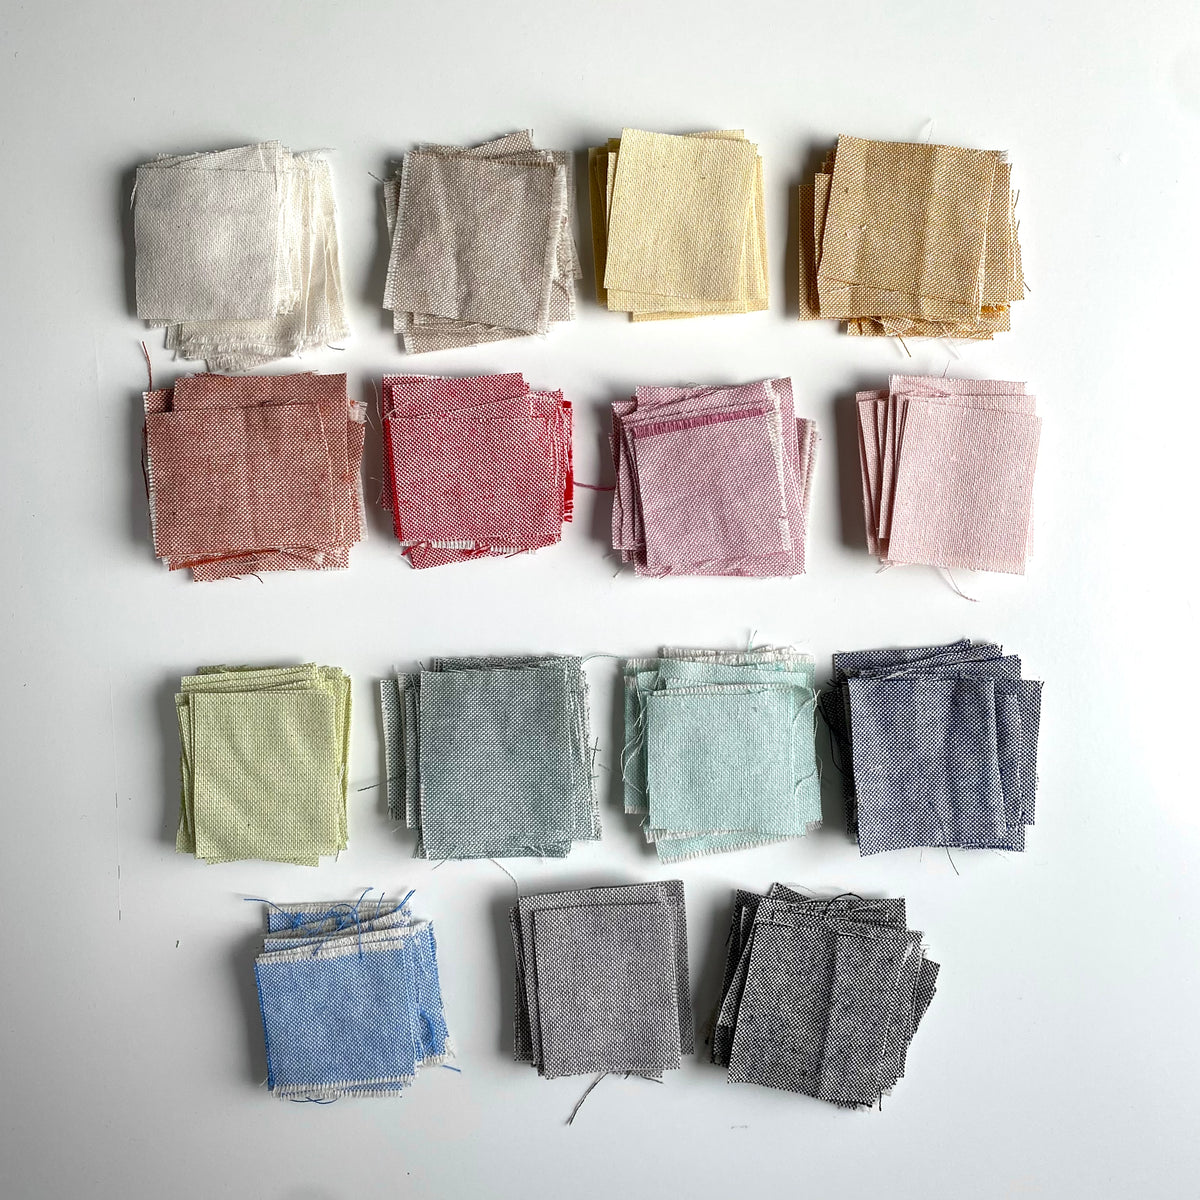 Request a Fabric Swatch/Sample